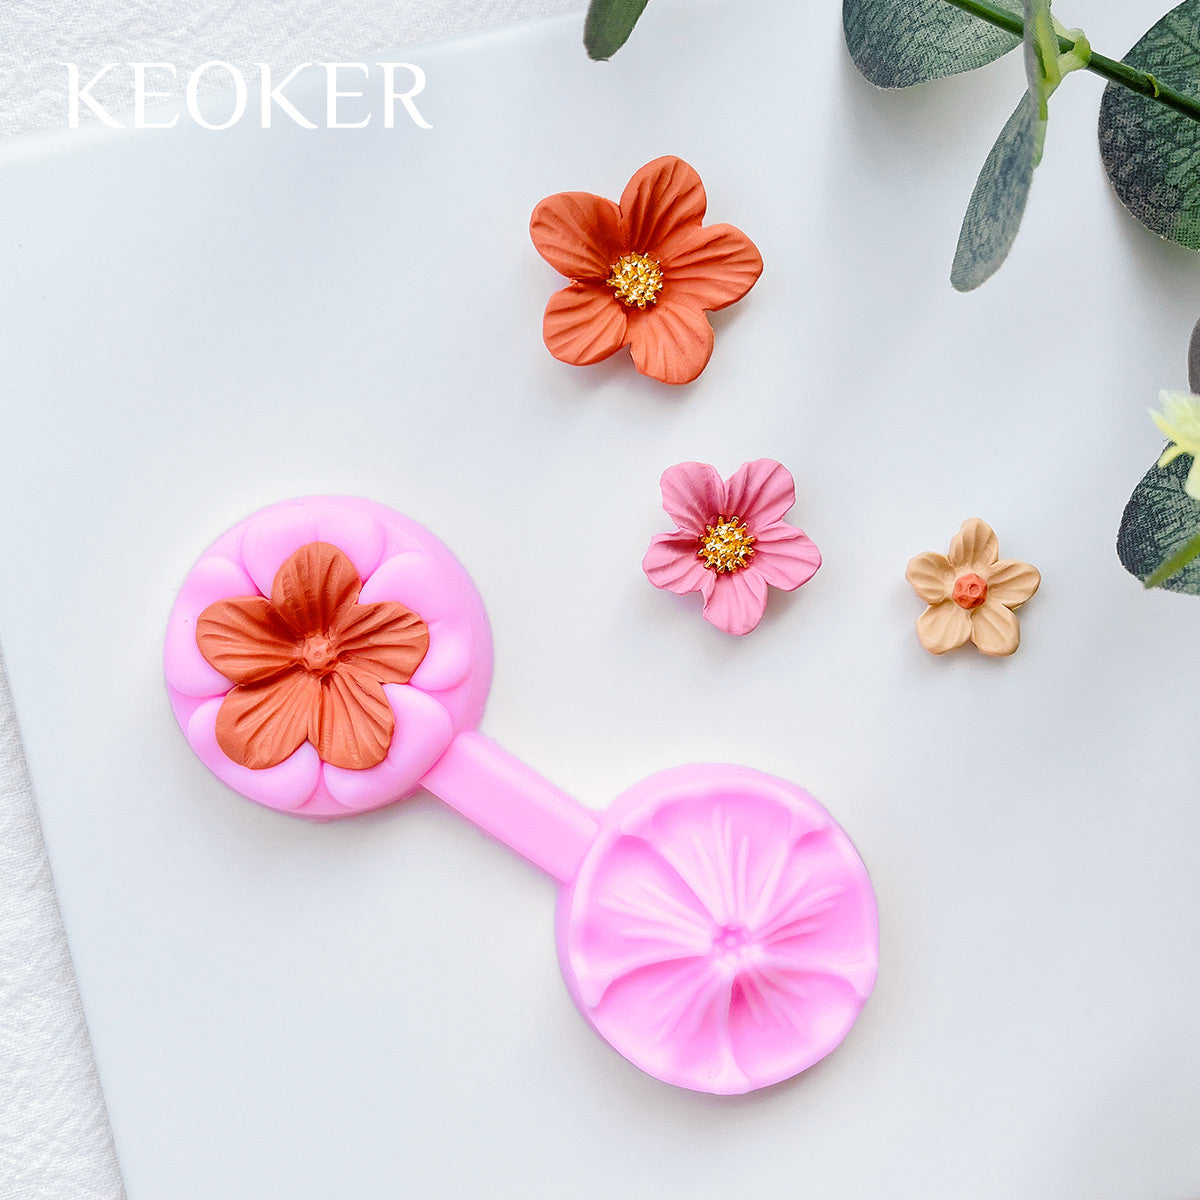 Keoker Flower Petal Clay Cutters - Flower Petals Clay Cutters for Earrings  Making, 6 Shapes with Petal Press Polymer Clay Moulds, Clay Cutters for  Polymer Clay Jewellery by Keoker - Shop Online